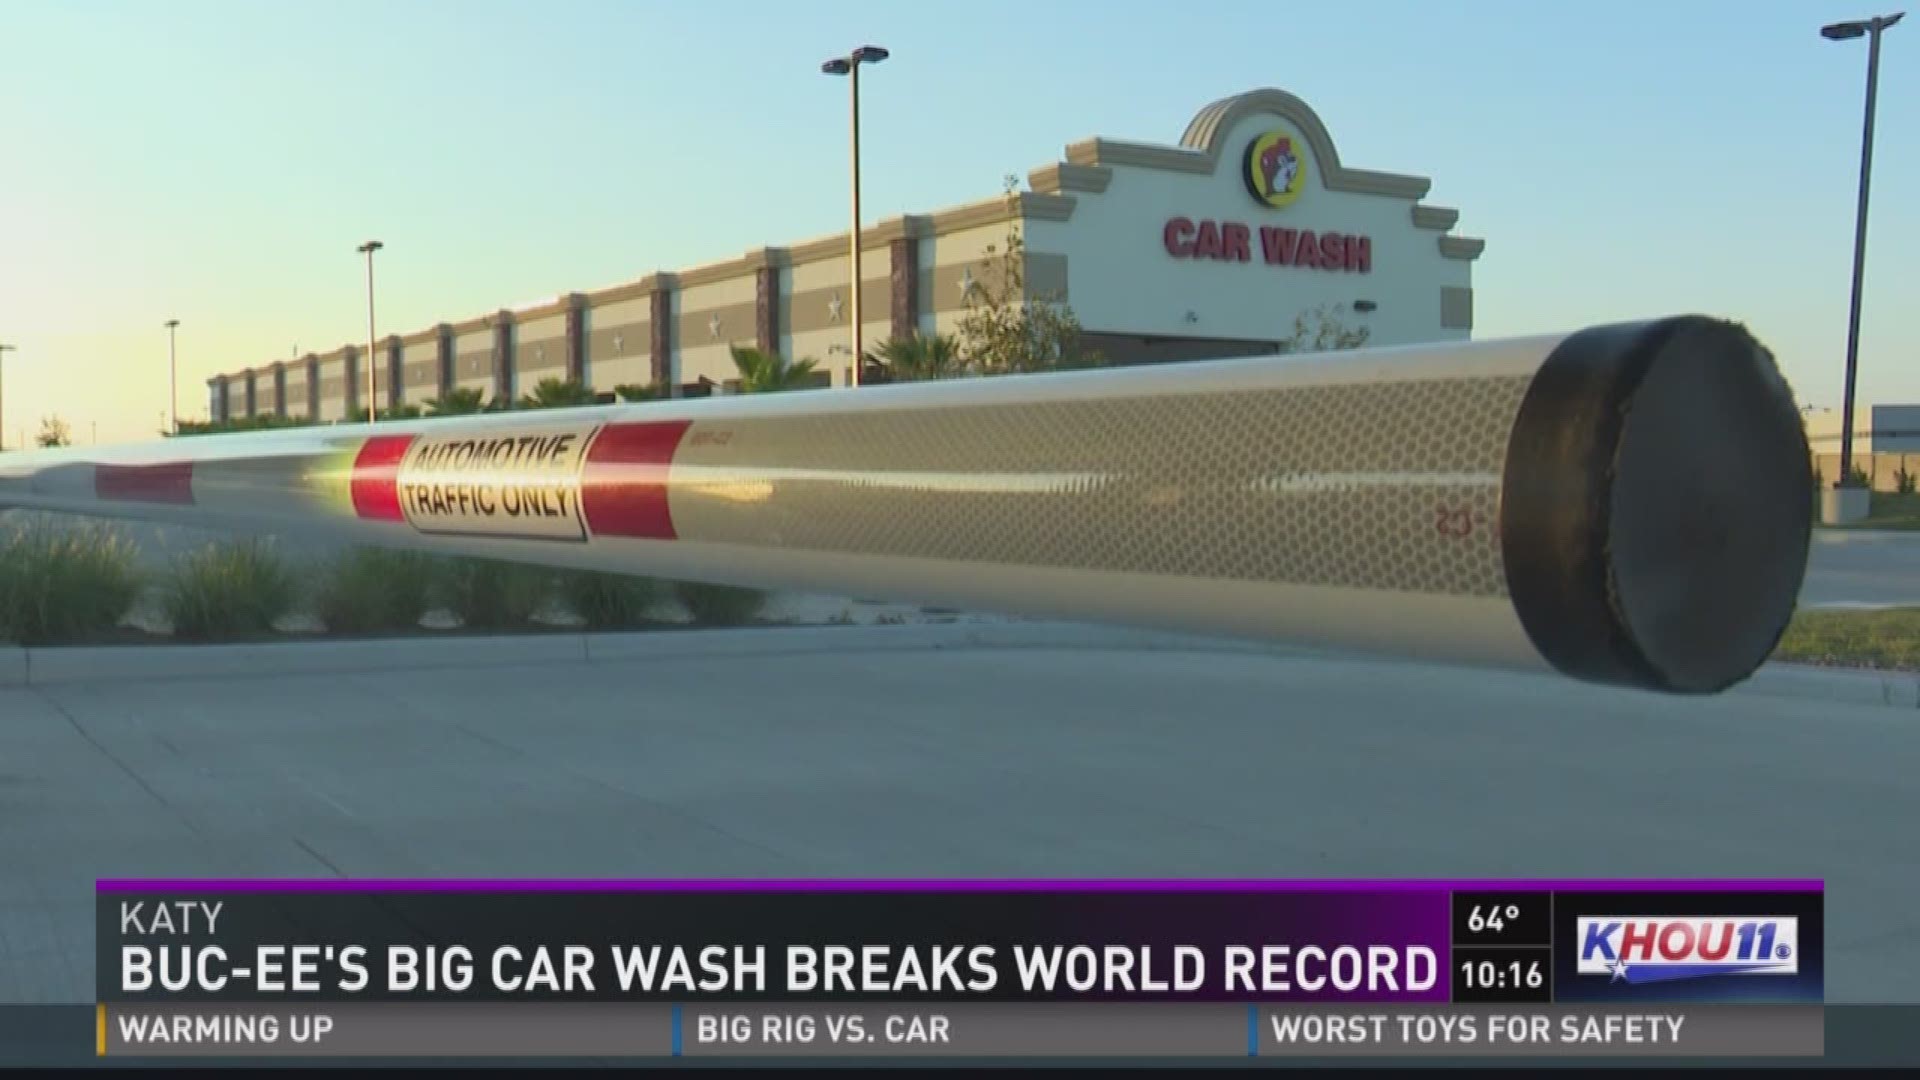 Everything is bigger in Texas, so it's no surprise the super-sized car wash at Buc-ee's landed in the record books.